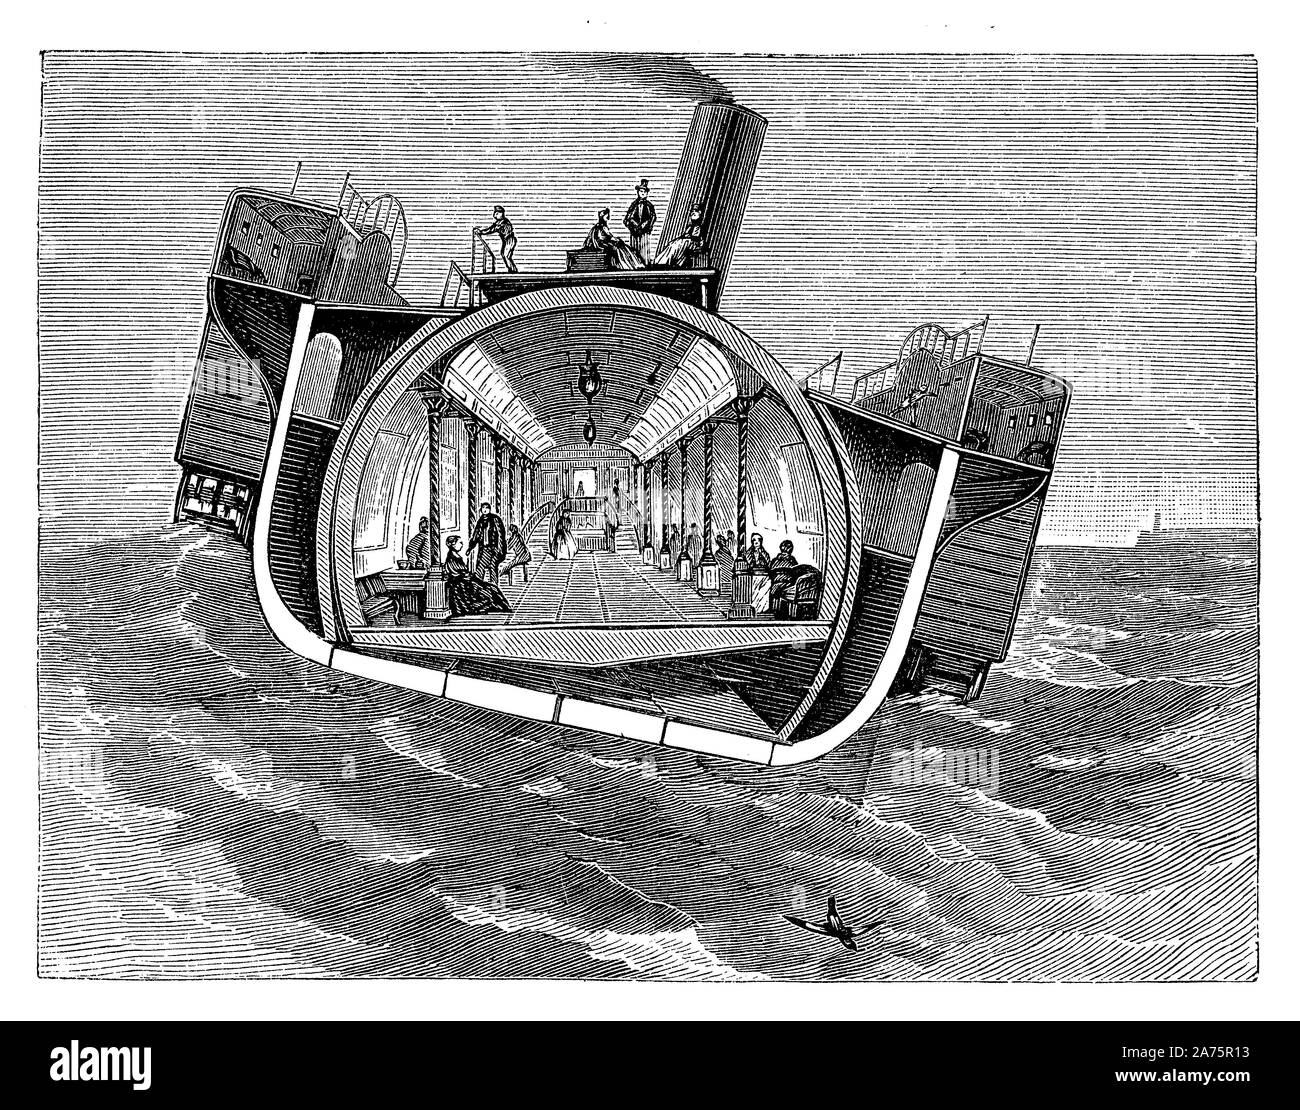 Steamer transatlantic cross section with hydrodynamic roll stabilizers 19th century Stock Photo